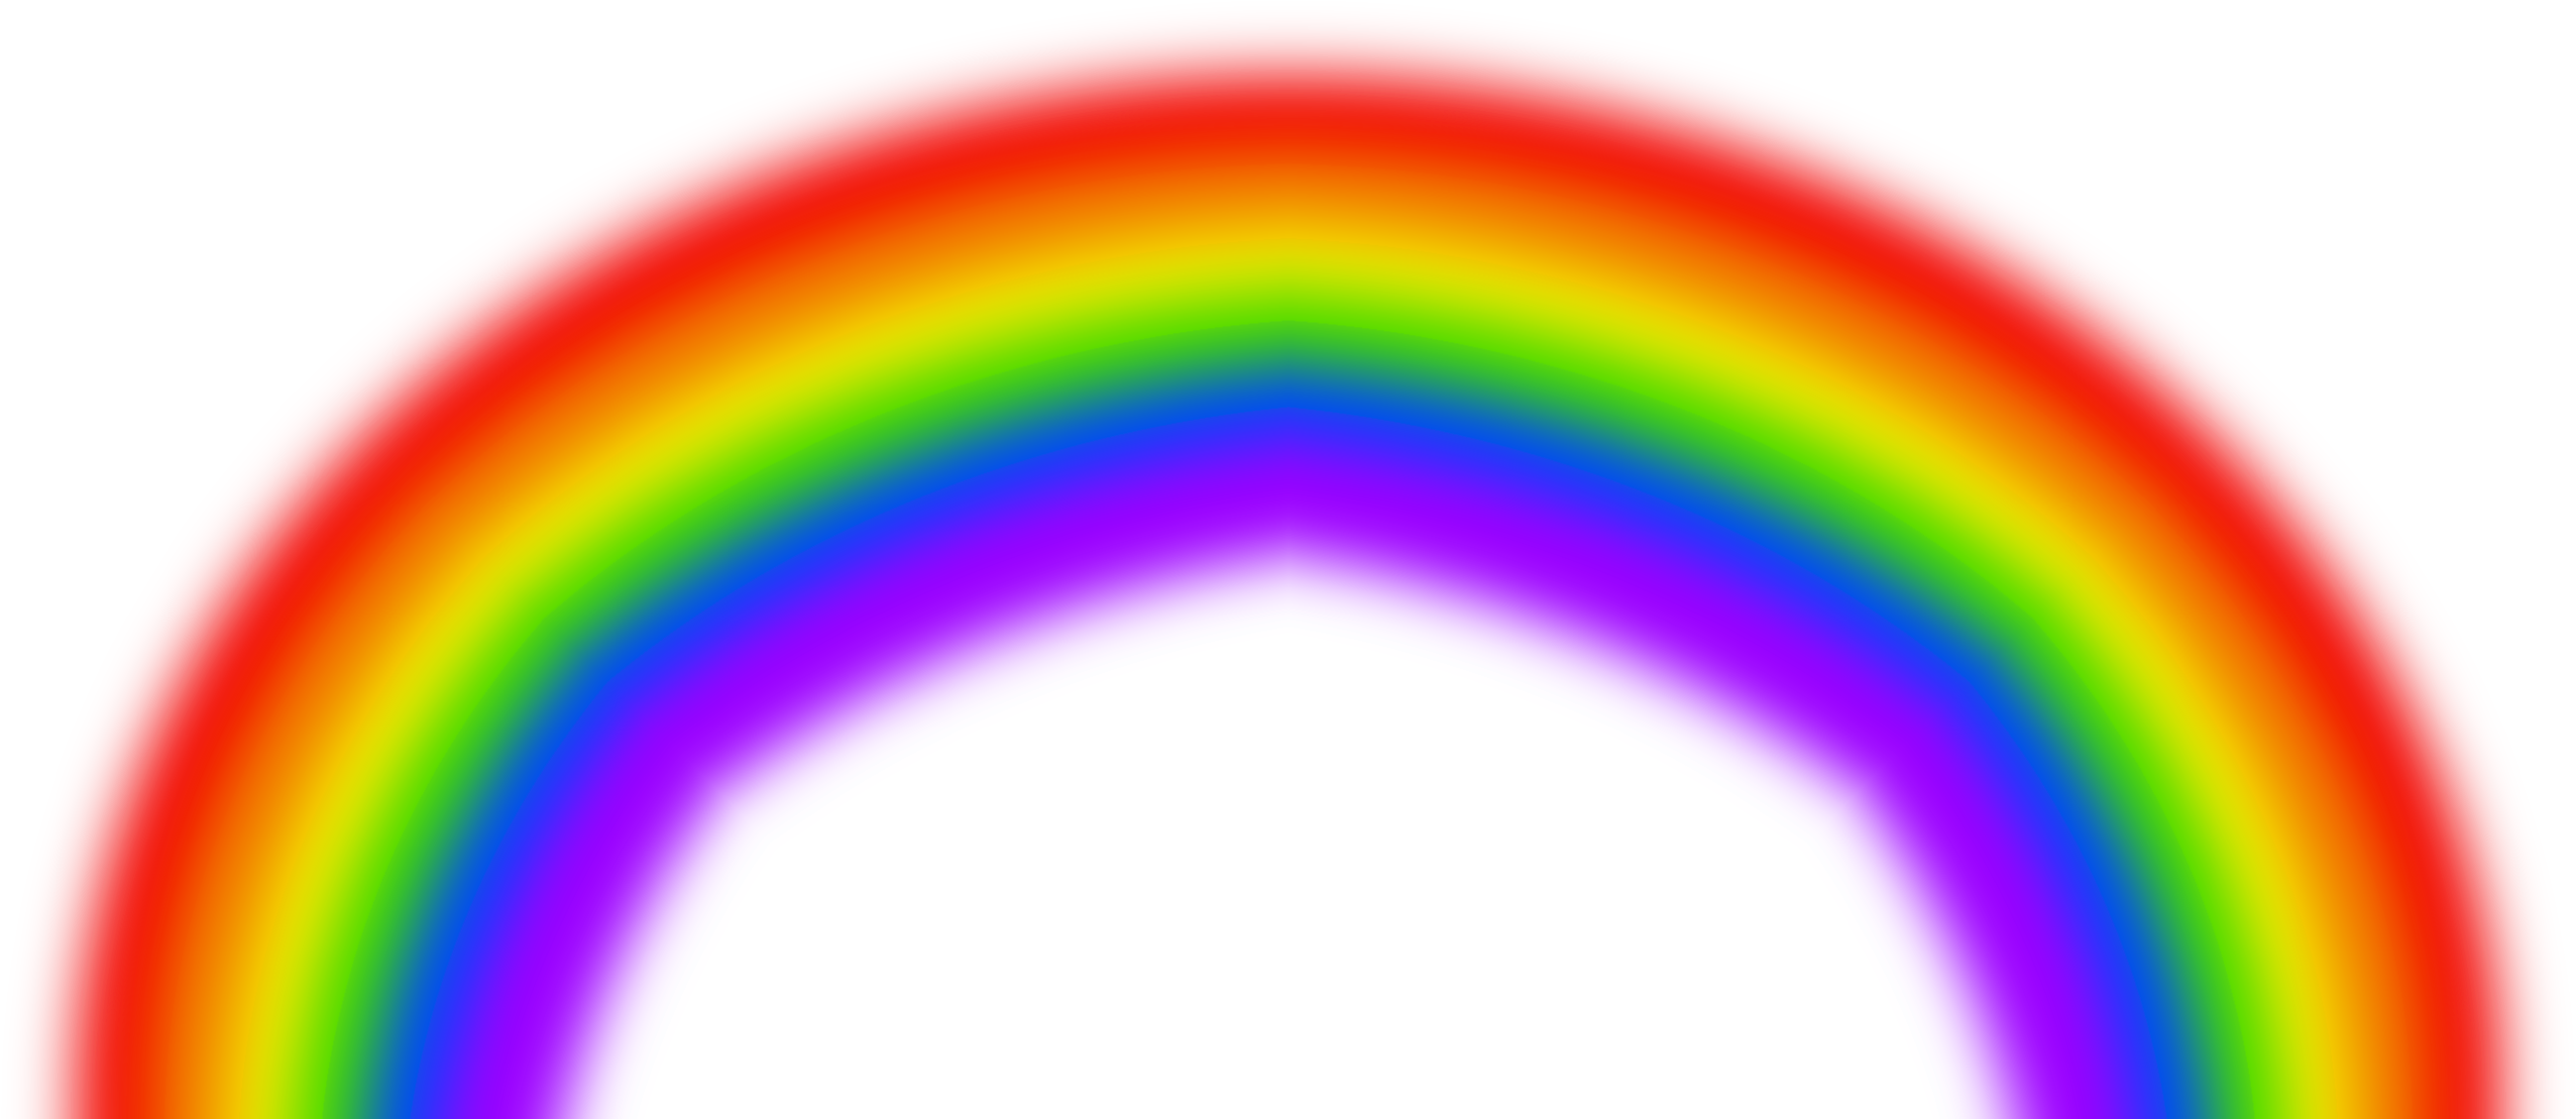 More From My Site - Rainbow For Photoshop (2720x1235)